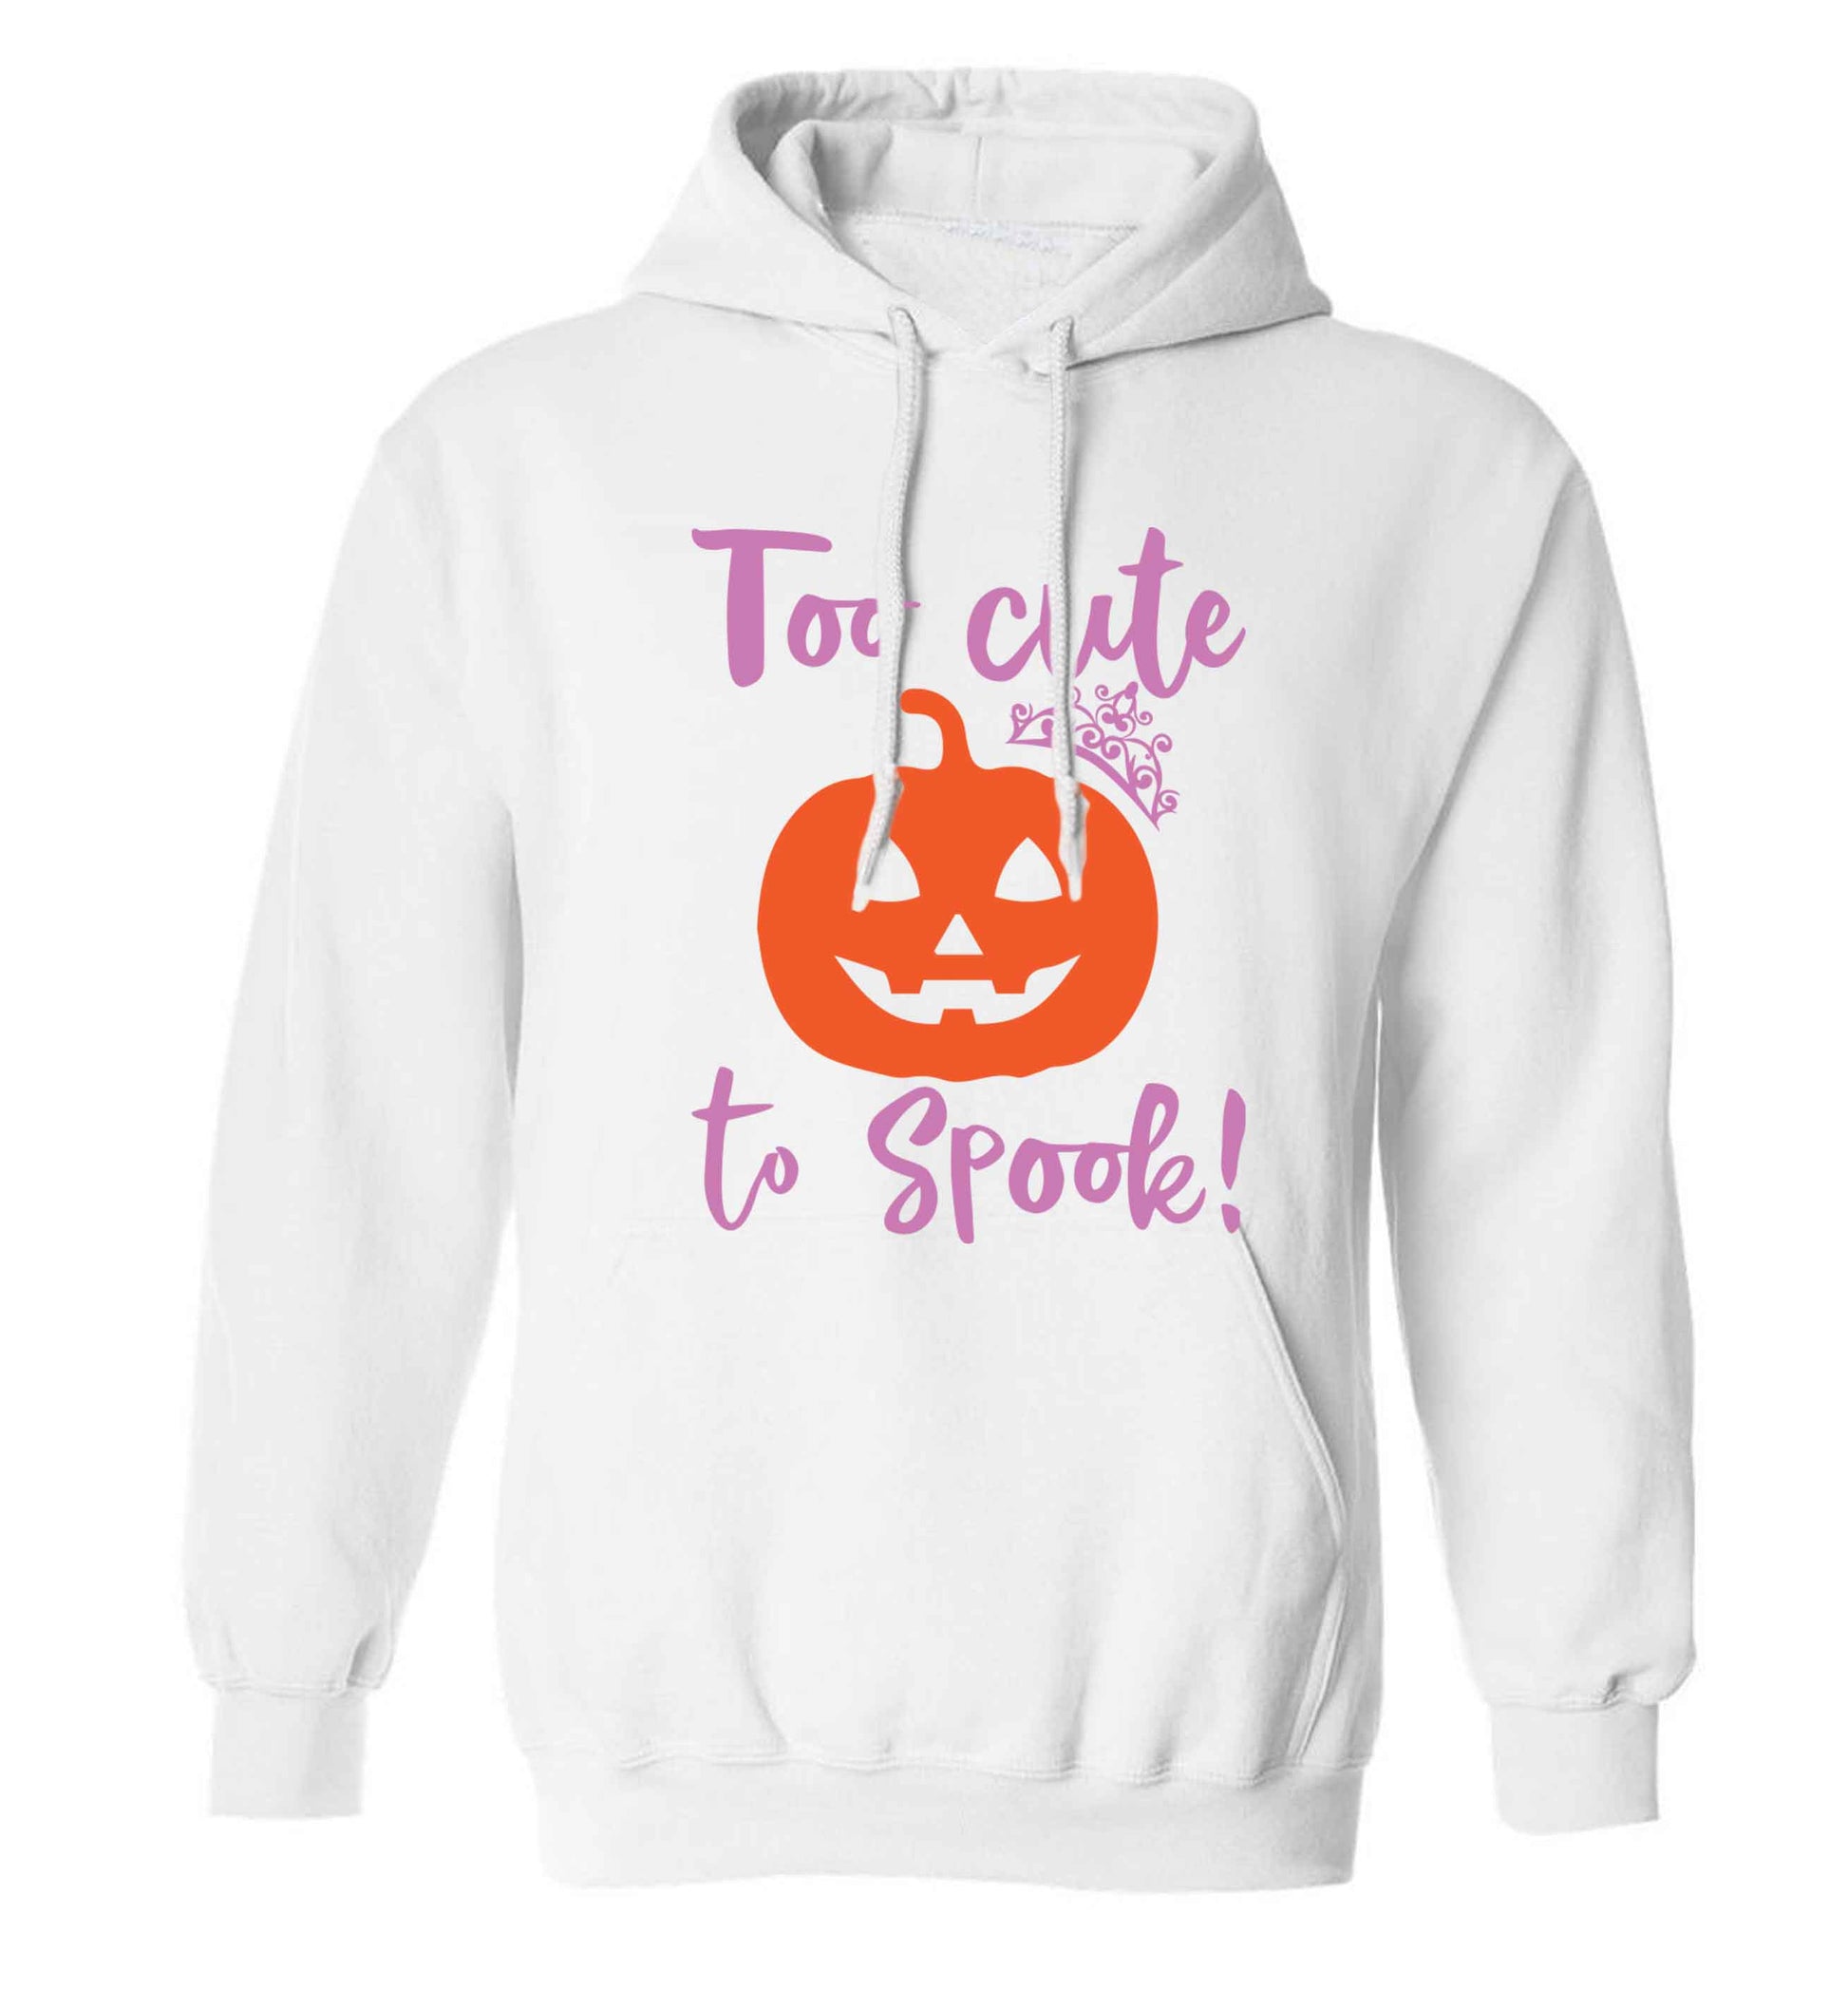 Too cute to spook! adults unisex white hoodie 2XL